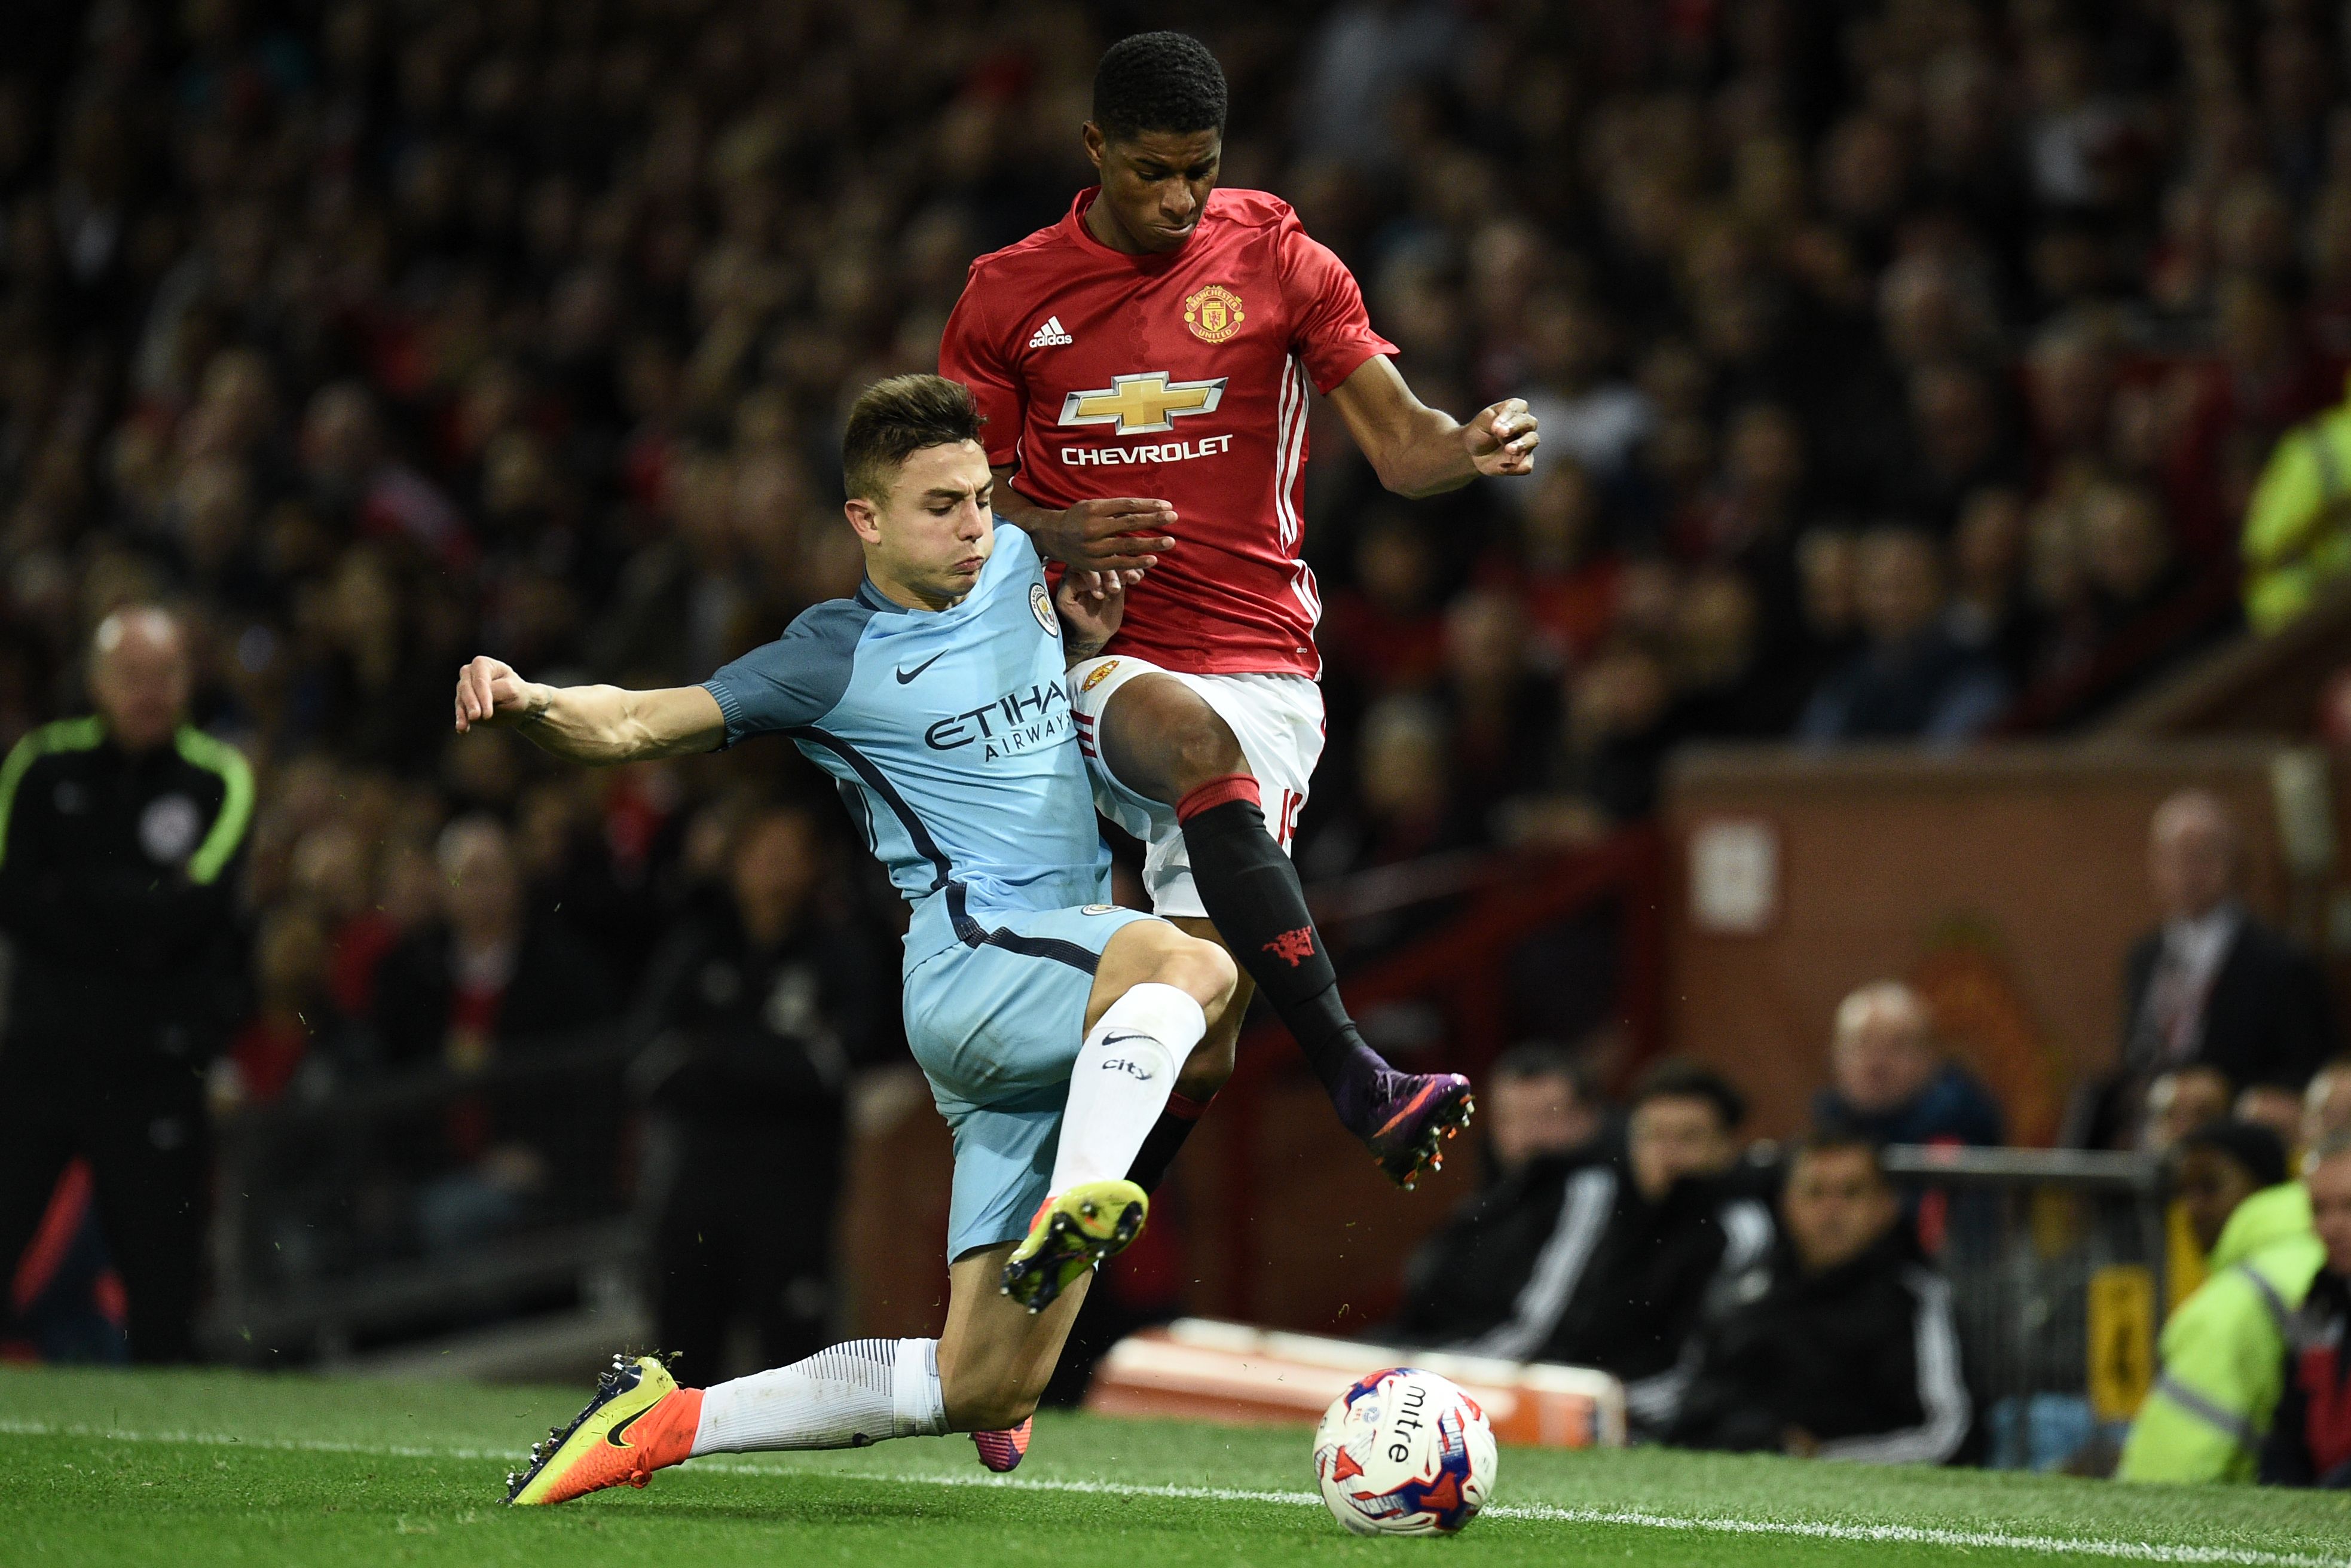 Manchester City's Spanish defender Pablo Maffeo (L) vies with Manchester United's English striker Marcus Rashford during the EFL (English Football League) Cup fourth round match between Manchester United and Manchester City at Old Trafford in Manchester, north west England on October 26, 2016. / AFP / Oli SCARFF / RESTRICTED TO EDITORIAL USE. No use with unauthorized audio, video, data, fixture lists, club/league logos or 'live' services. Online in-match use limited to 75 images, no video emulation. No use in betting, games or single club/league/player publications.  /         (Photo credit should read OLI SCARFF/AFP/Getty Images)